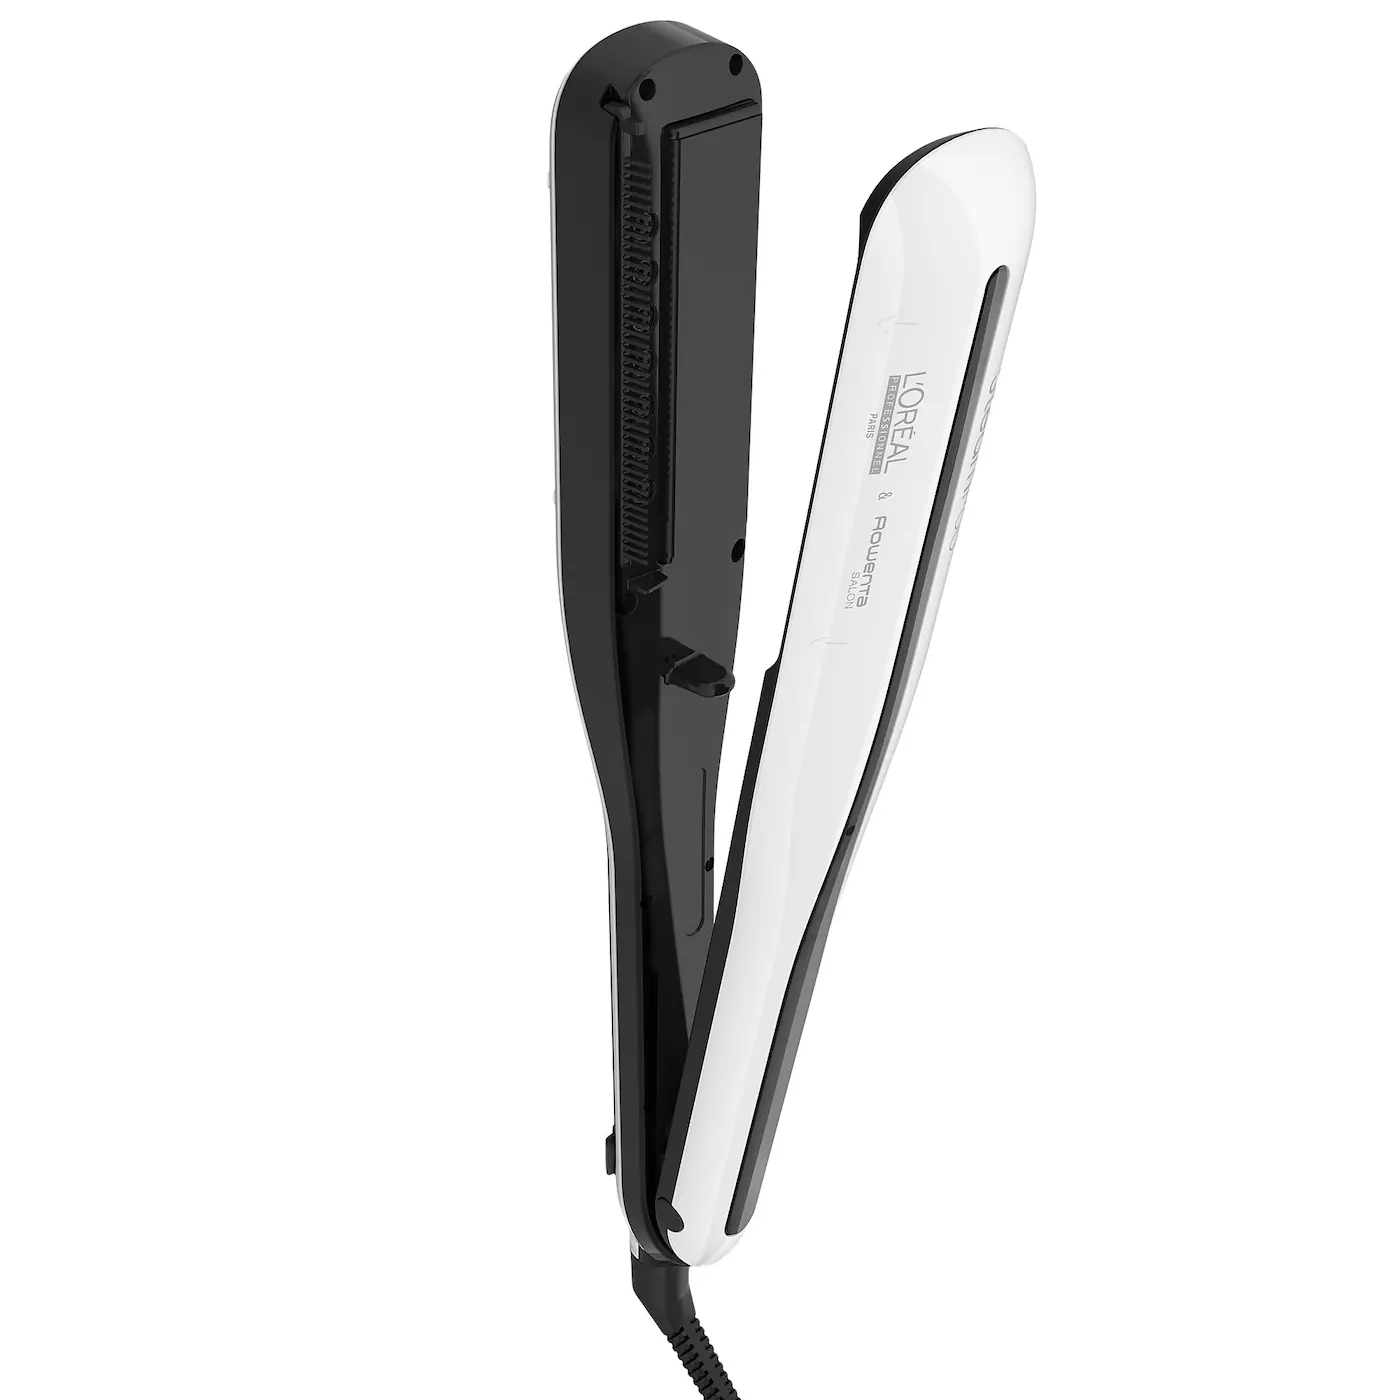 L’Oreal Professionnel Steampod Flat Iron and Styler